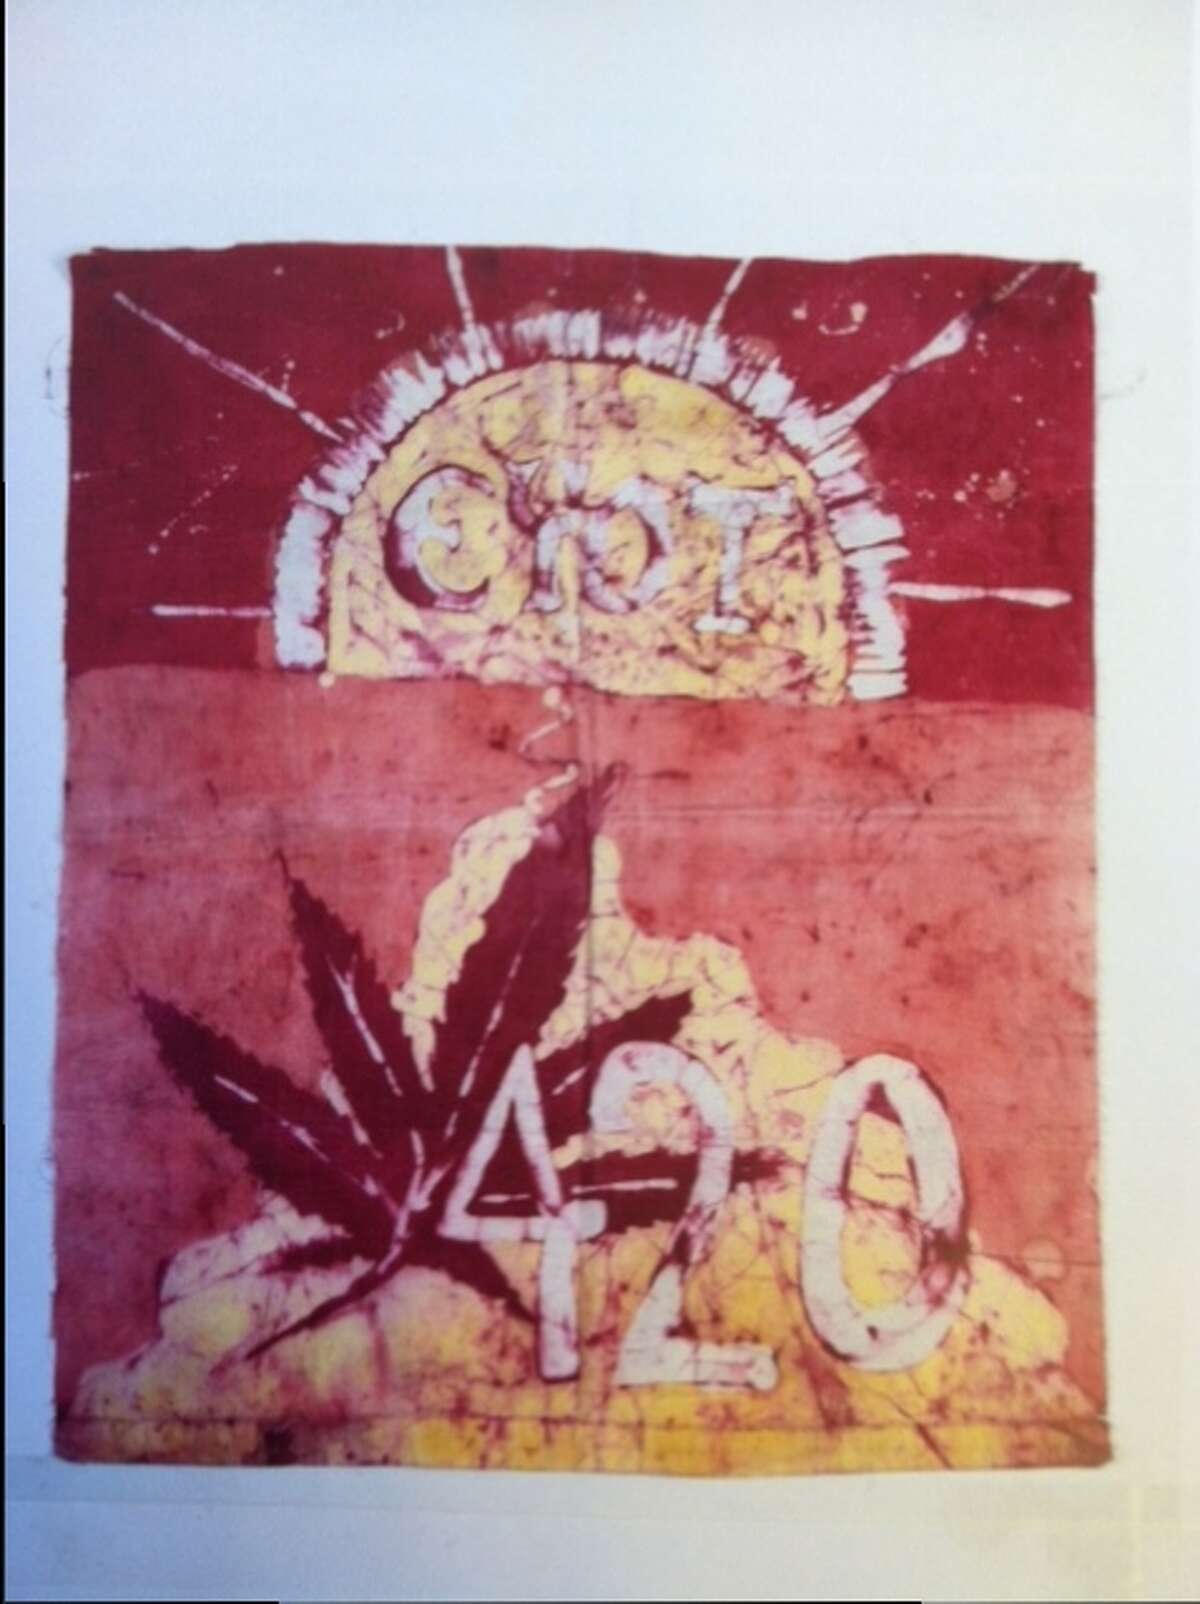 The 420 flag, pictured here, was made by a friend of the Waldos named Patty Young in the 1970s. The phrase "EYOT" at the top was mostly meaningless, but it became used as a substitute for 'It’s all too weird and funny!'"